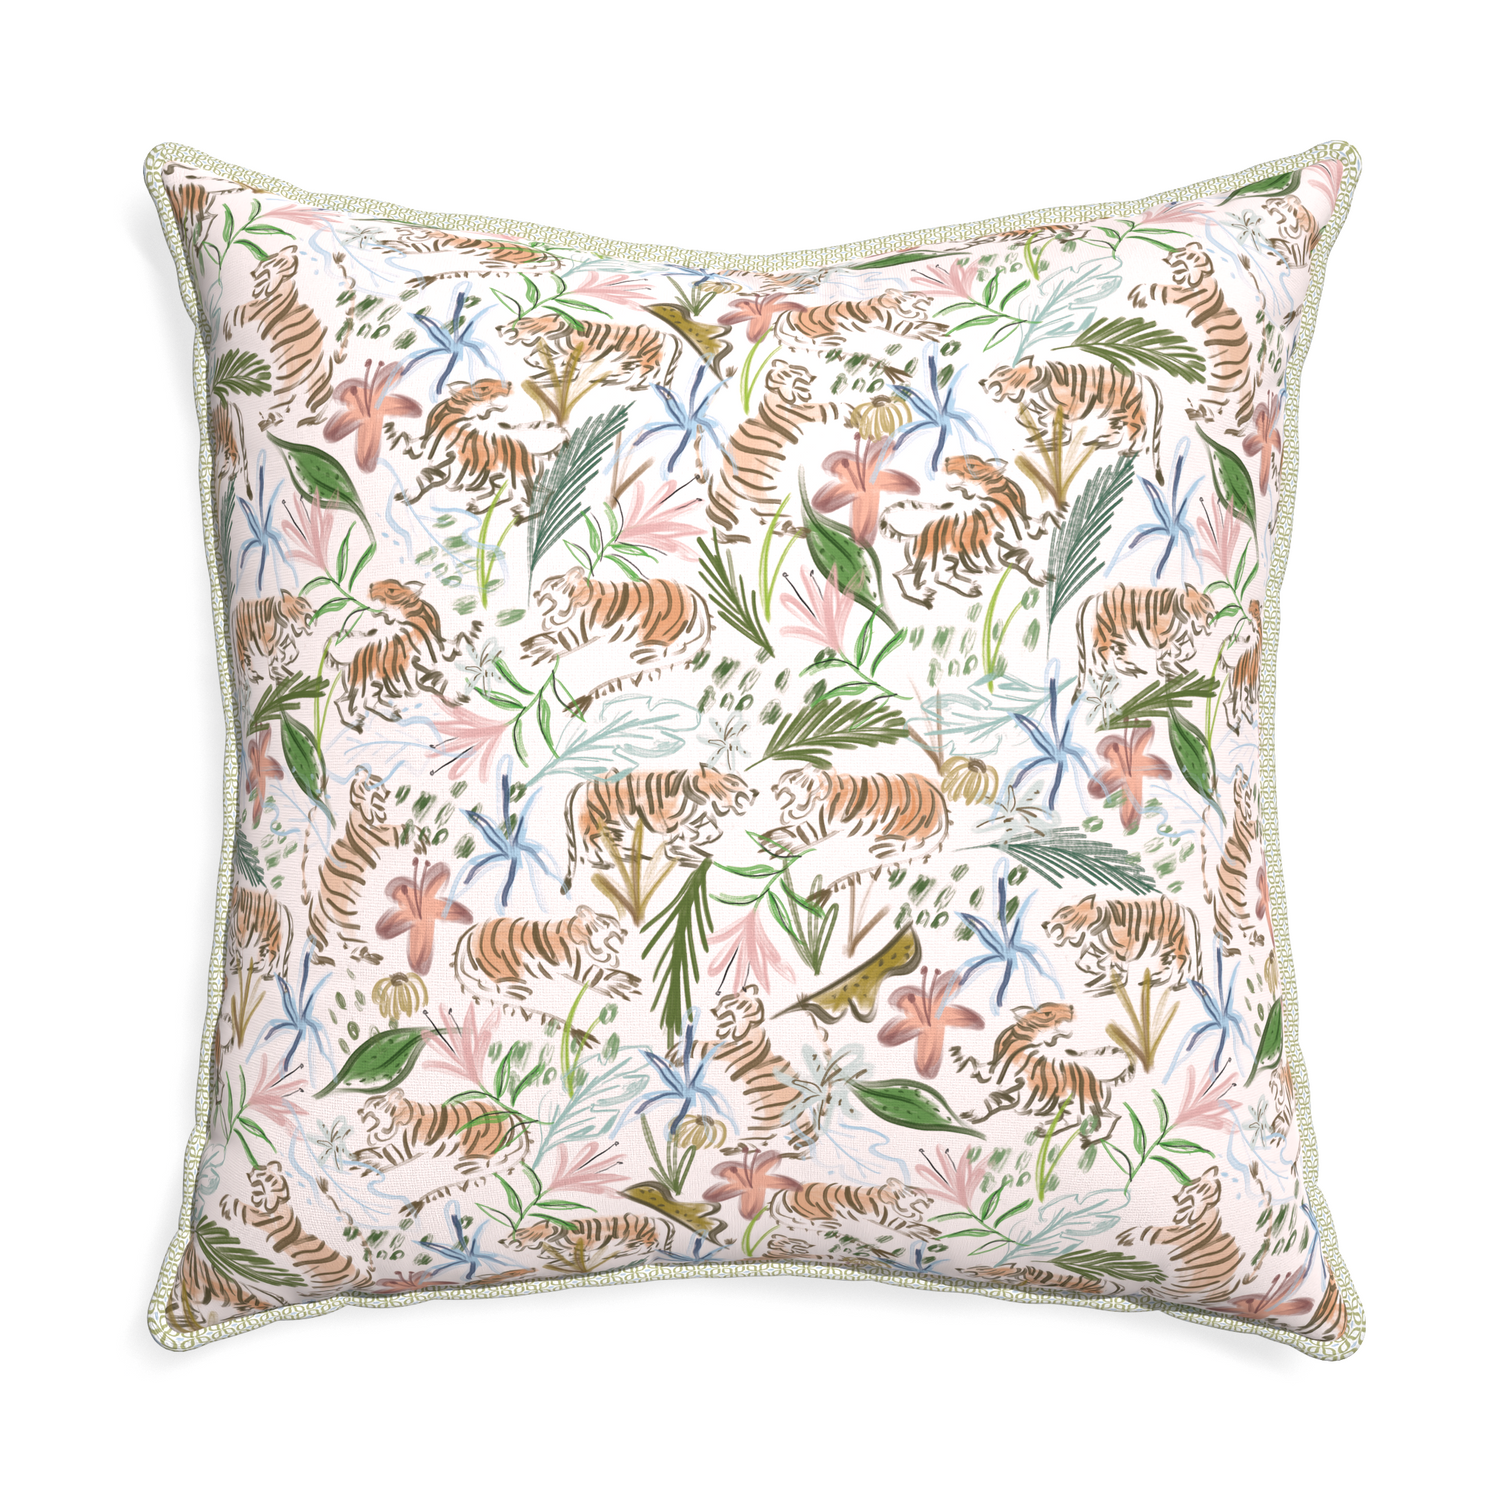 Euro-sham frida pink custom pink chinoiserie tigerpillow with l piping on white background